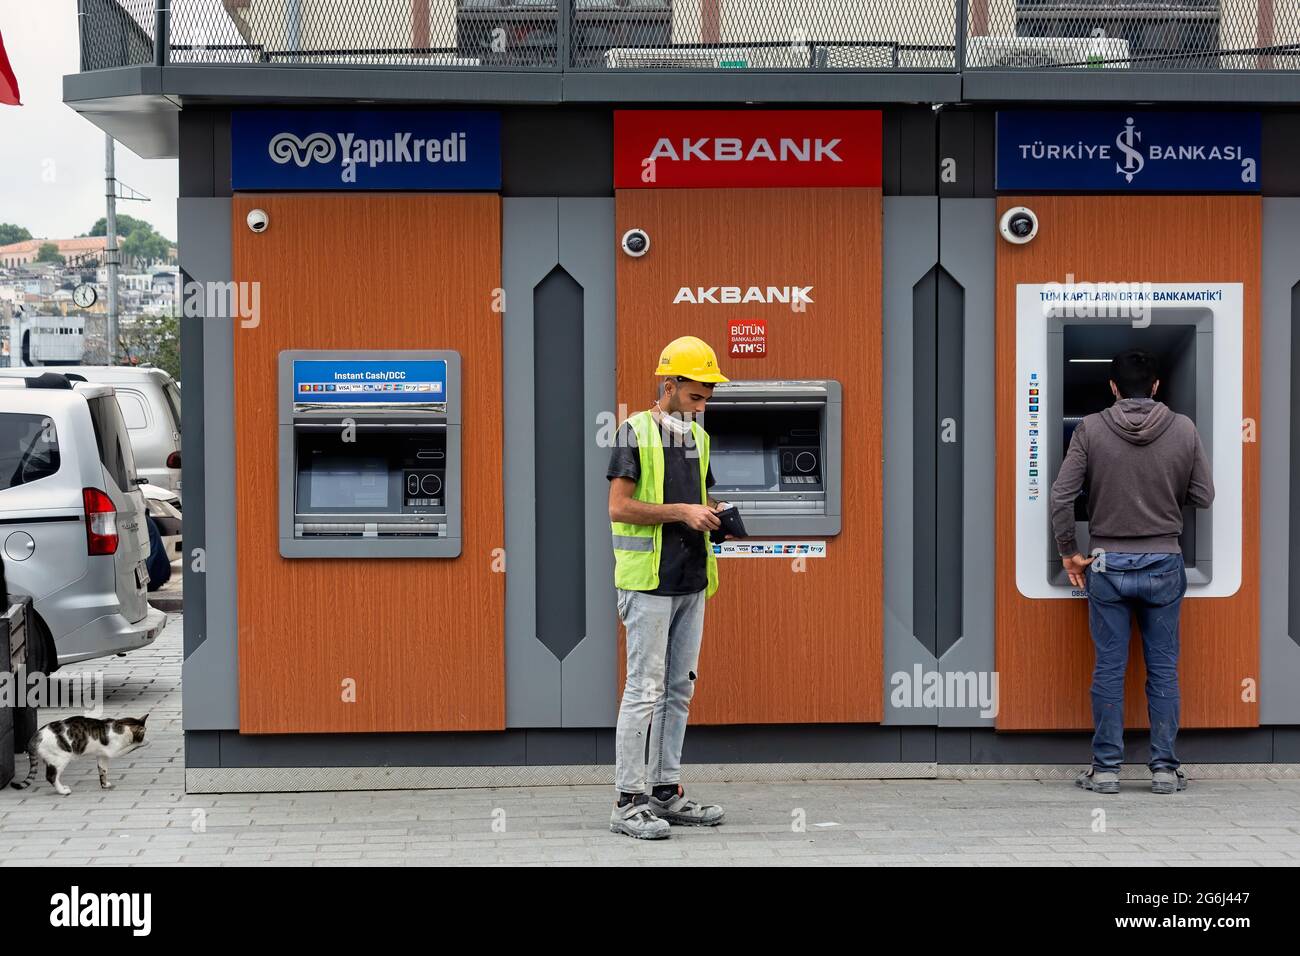 Construction worker in front of Yapikredi, Akbank, Isbank bank ATM s, after withdrawing monthly paycheck. Karakoy, Istanbul - Turkey. Stock Photo